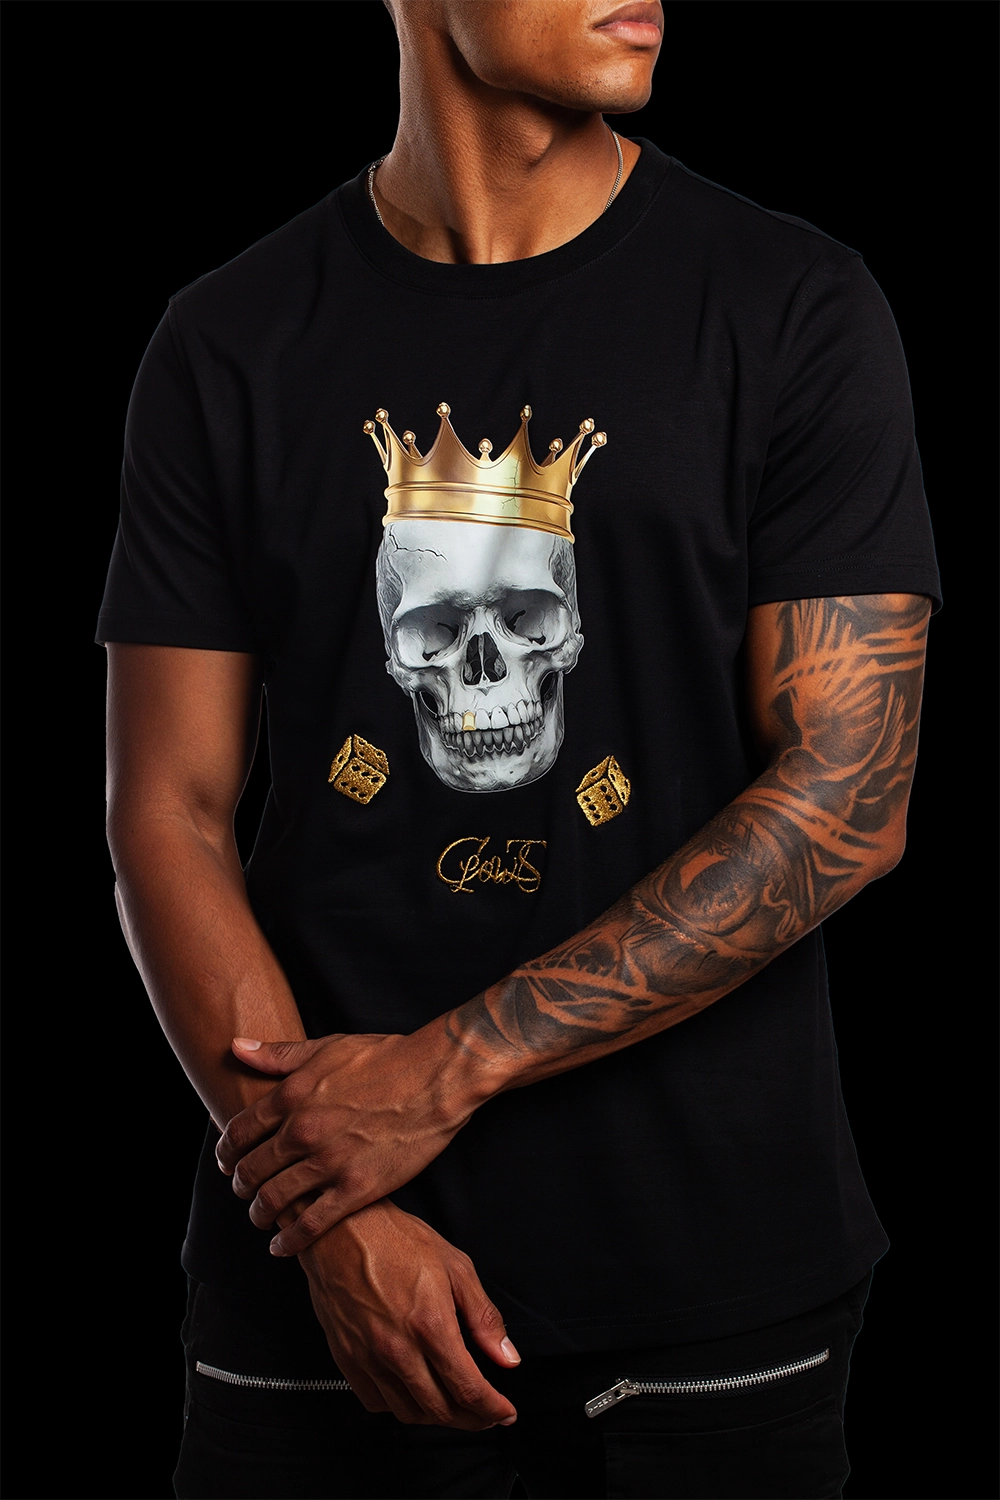 Black Art T Shirt embroidered with the worlds finest Piana Clerico 24-carat gold thread- made exclusively in Italy designed in Ireland